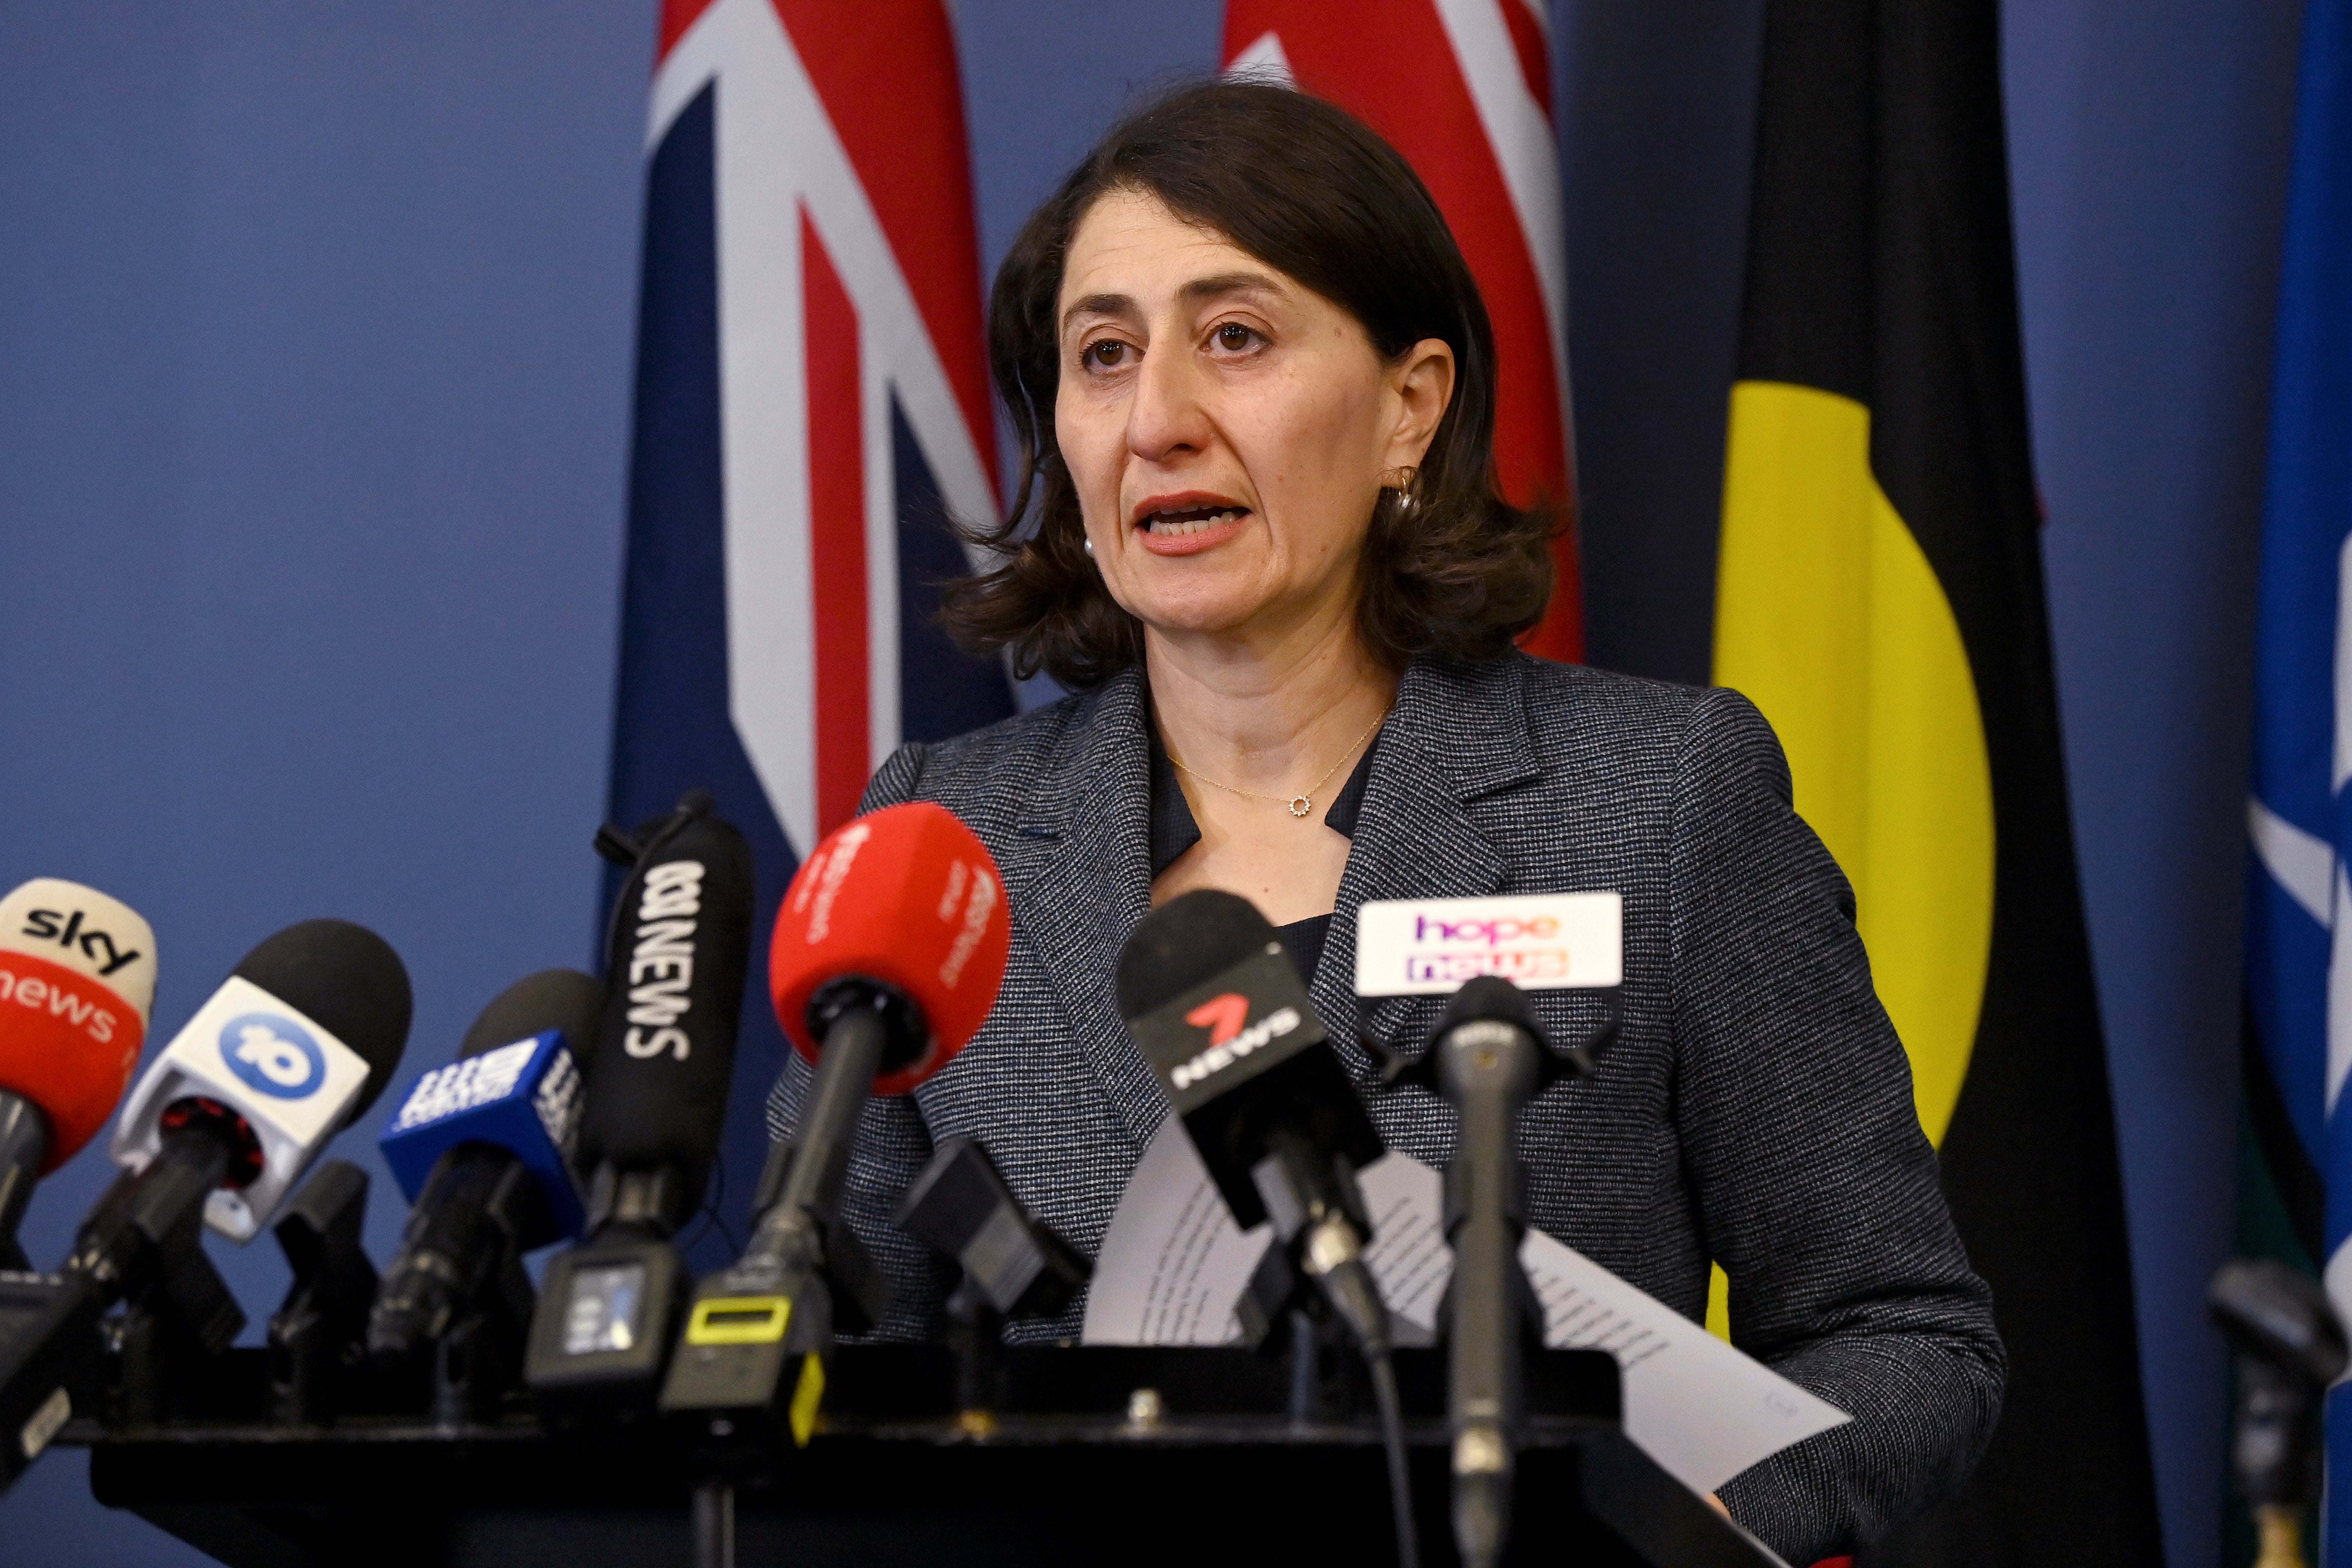 Berejiklian’s shock resignation comes as NSW battles the biggest COVID-19 outbreak in the country